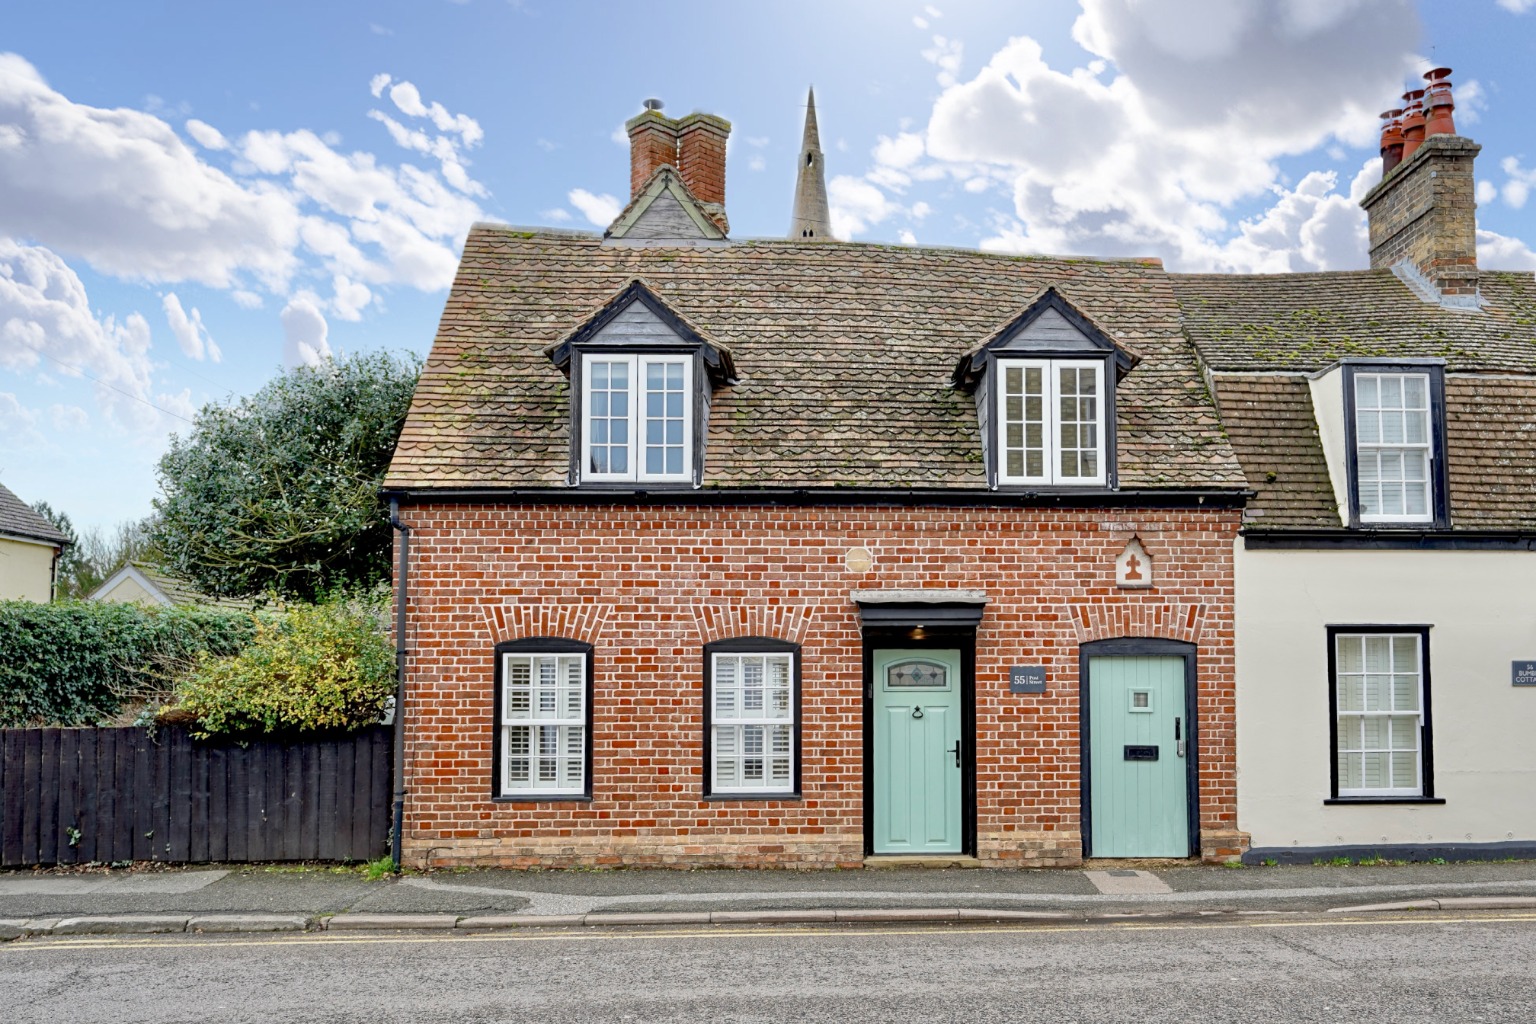 3 bed semi-detached house for sale in Post Street, Huntingdon - Property Image 1